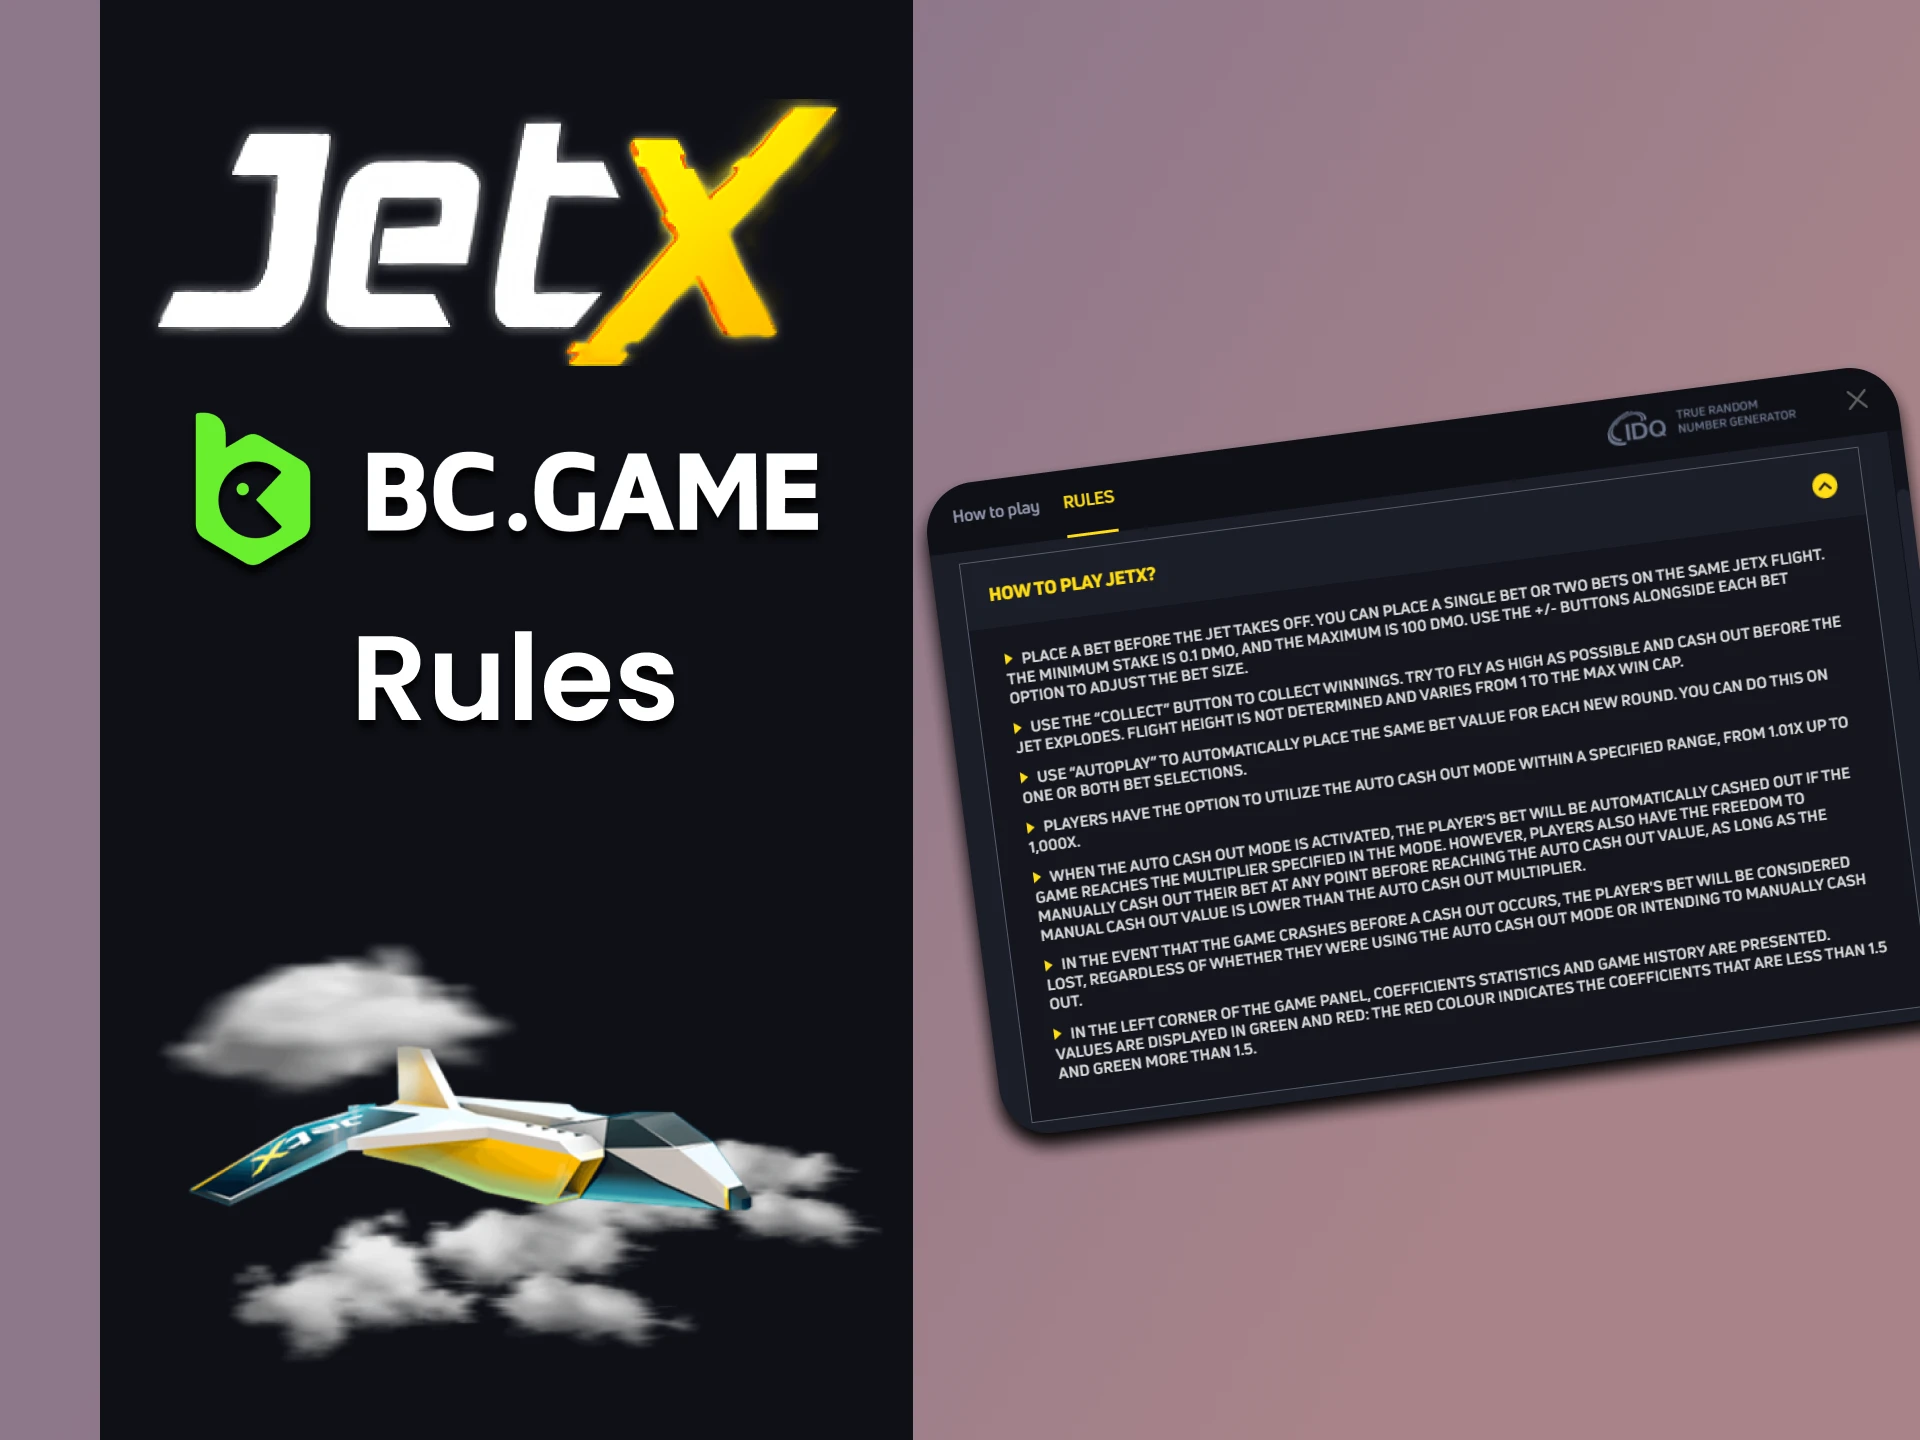 Be sure to read the JetX rules on BC Game.